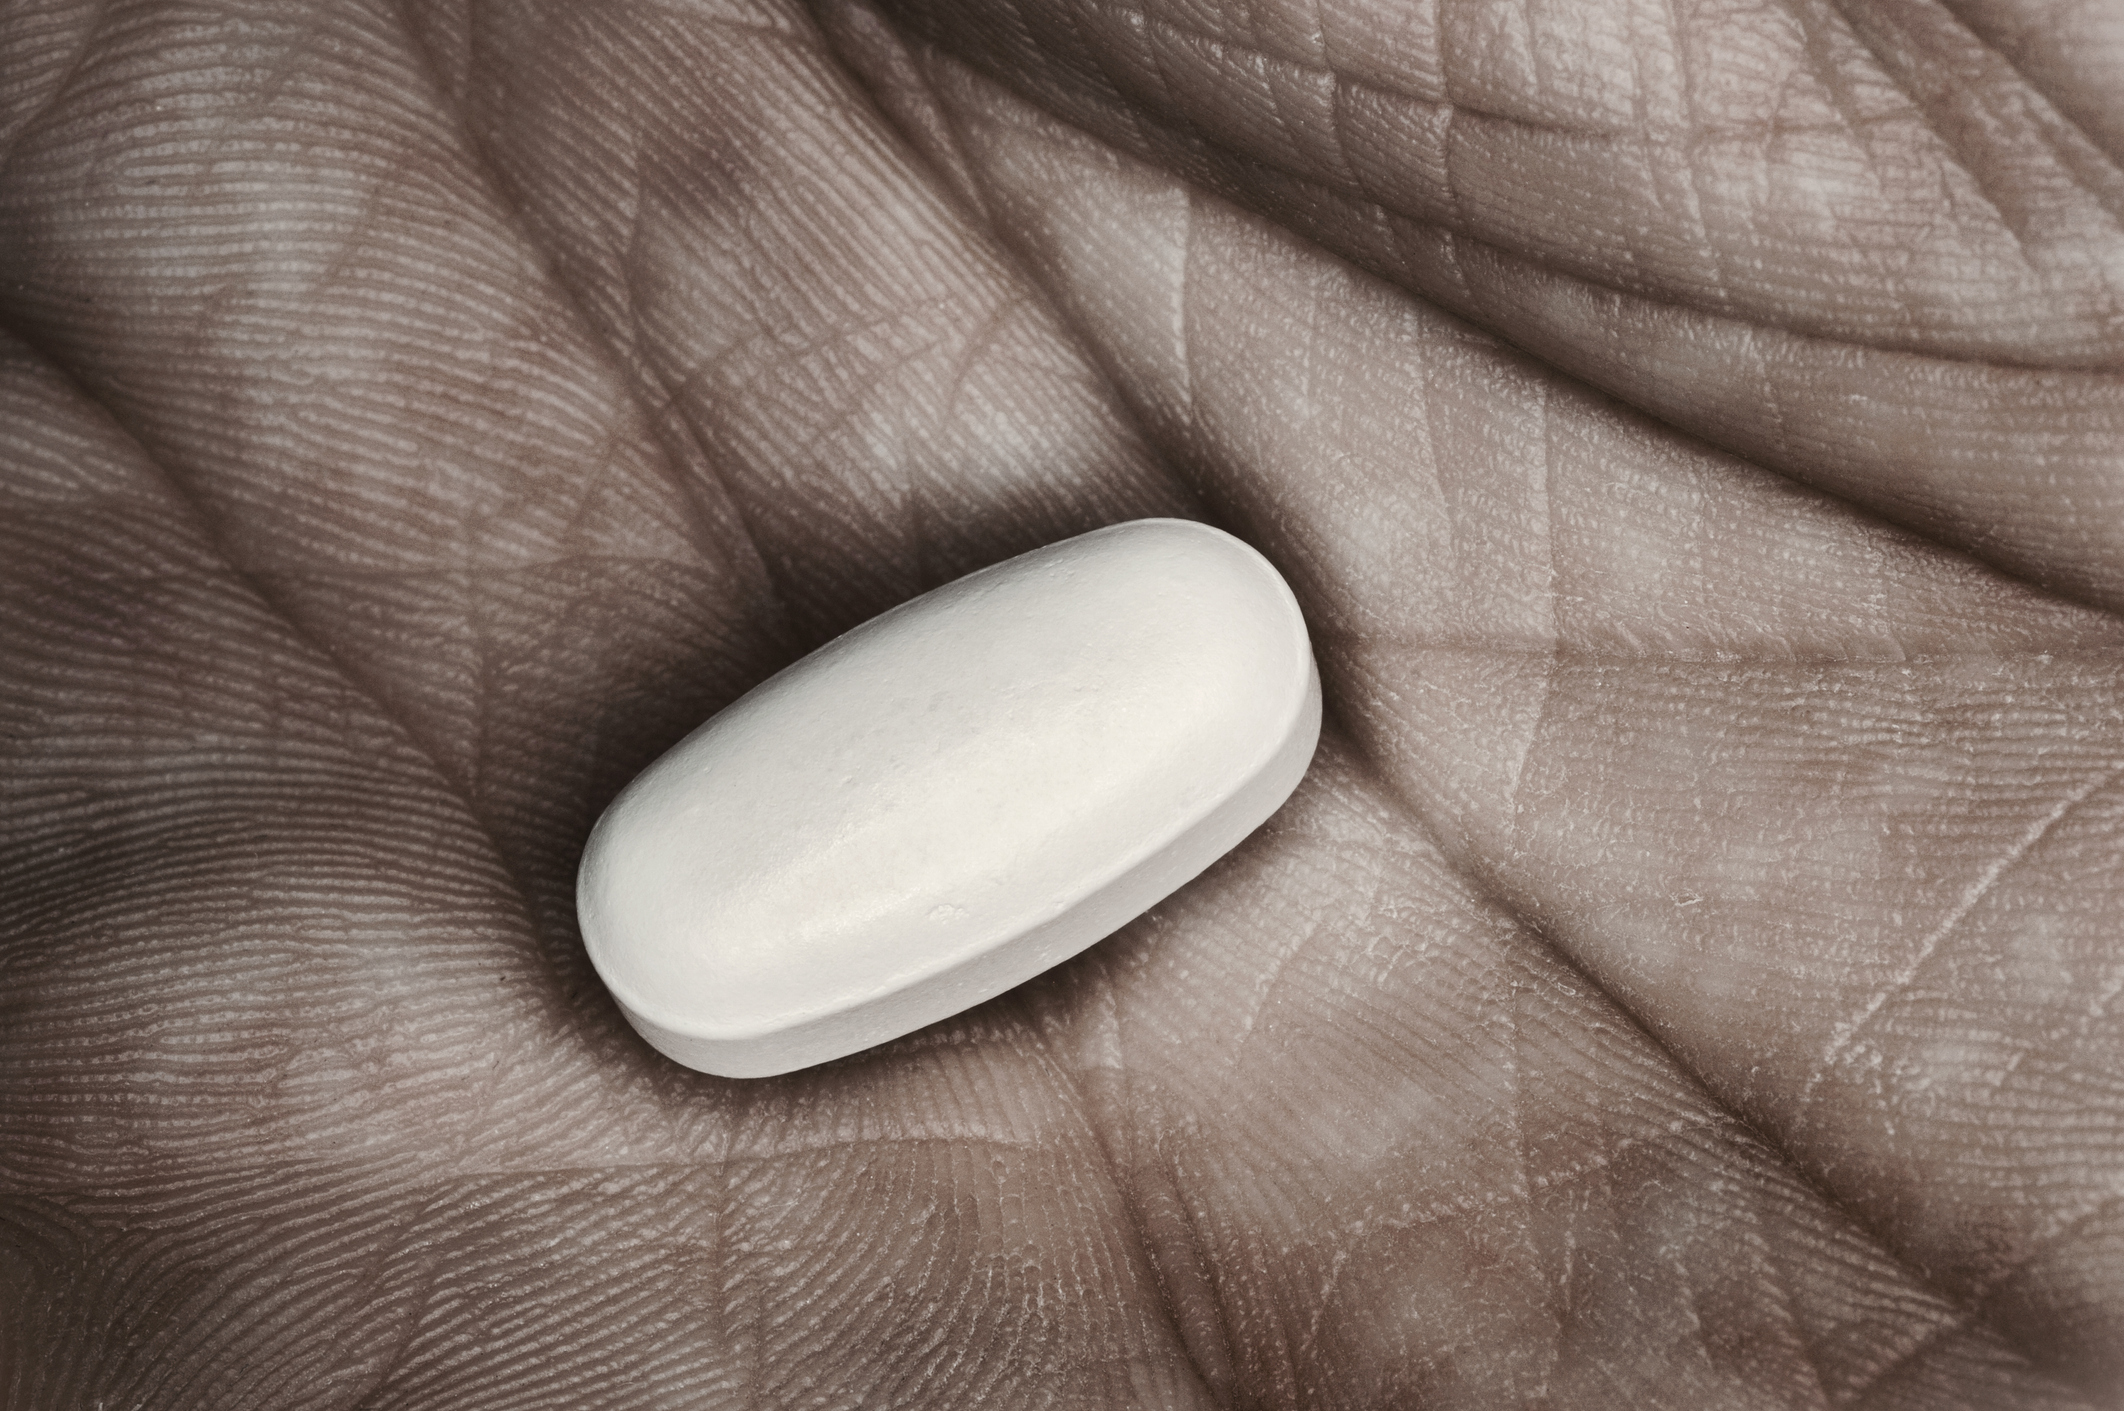 close-up of pill in man's hand